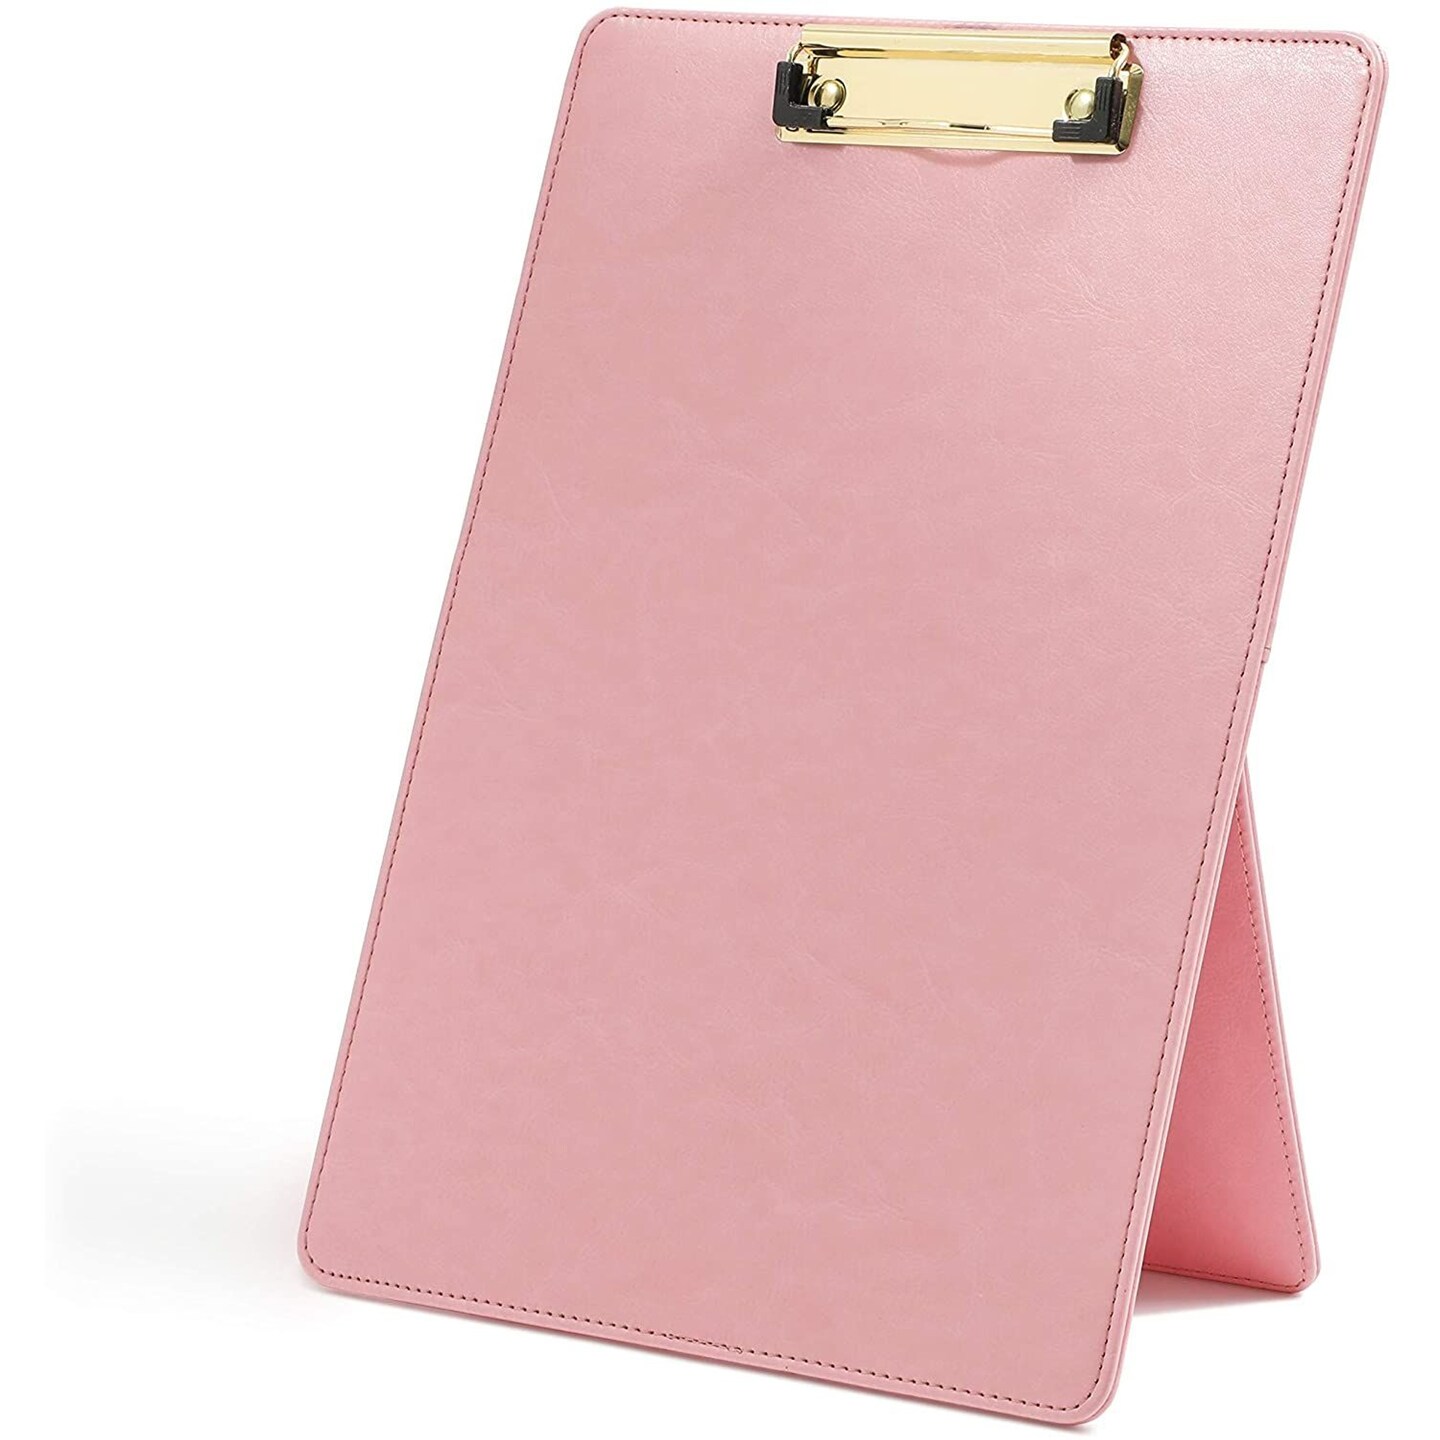 Pink Standing Clipboard, PU leather Foldable Stand and Document Holder for Office, Letters, Legal Documents (9 x 13 In)